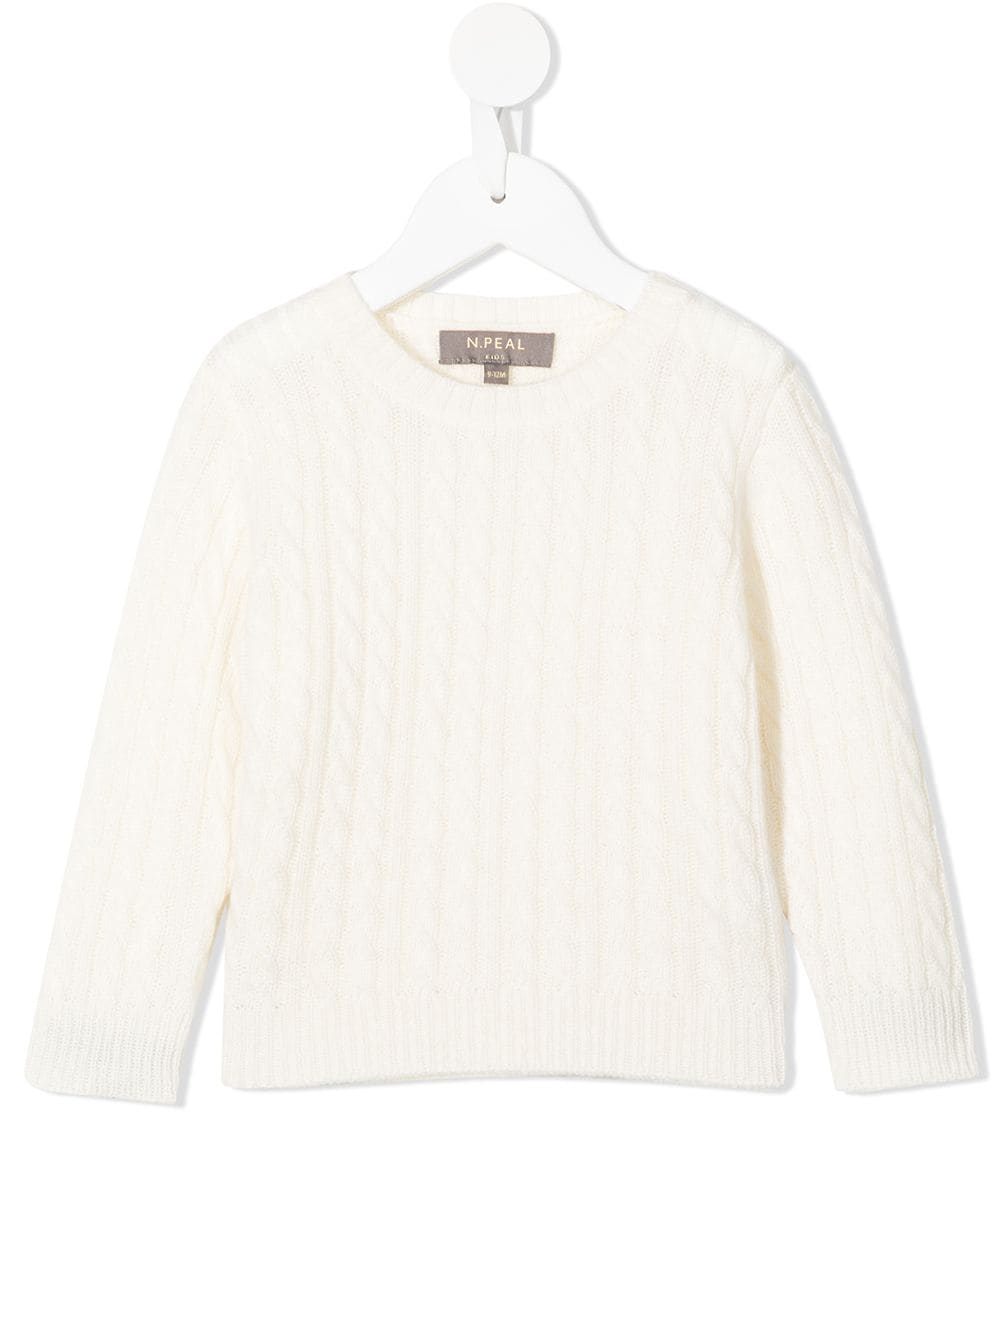 N.PEAL KIDS cable-knit sweater - White von N.PEAL KIDS